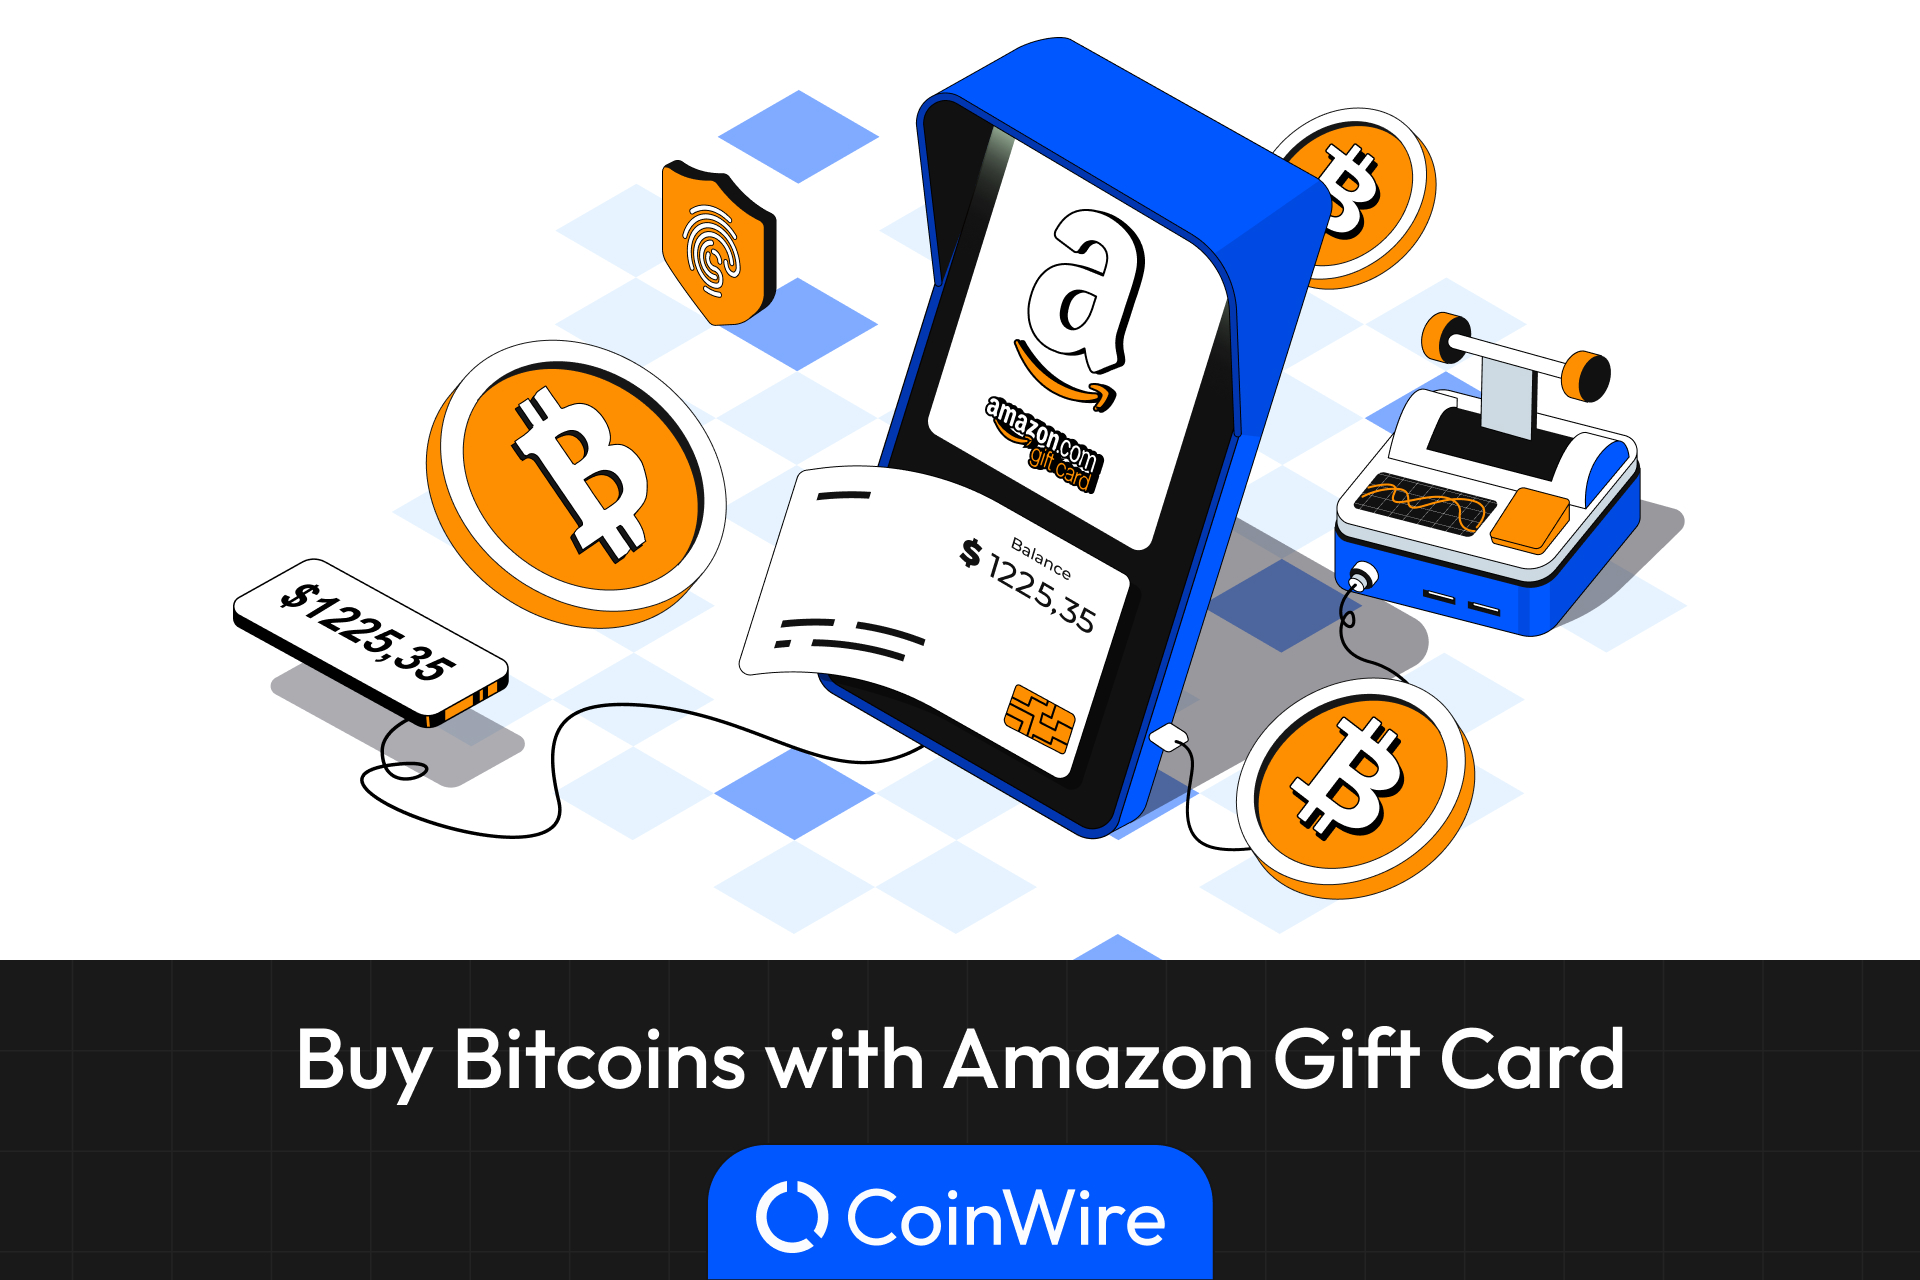 How To Buy Bitcoins With Amazon Gift Card in 